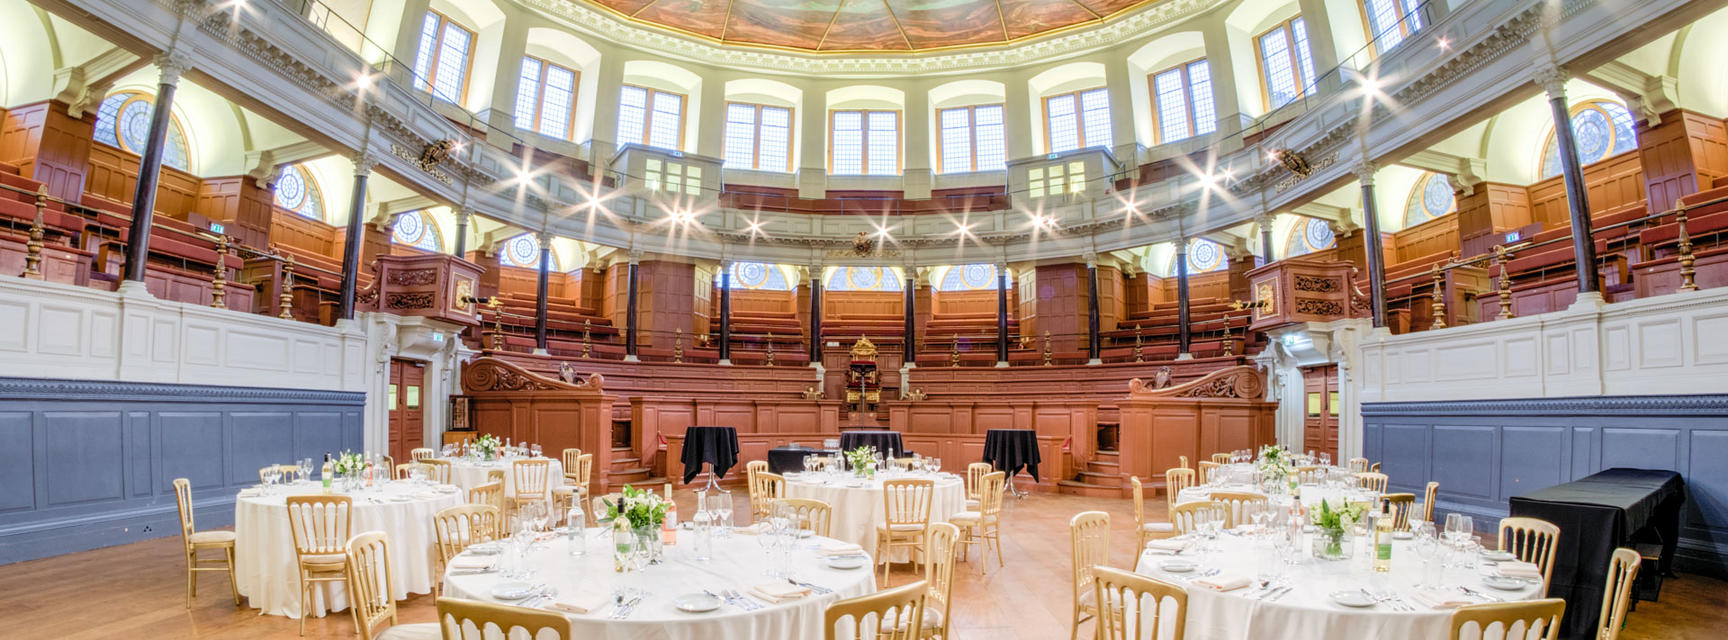 Photo of Sheldonian Theatre with tables and chairs set up for a wedding reception